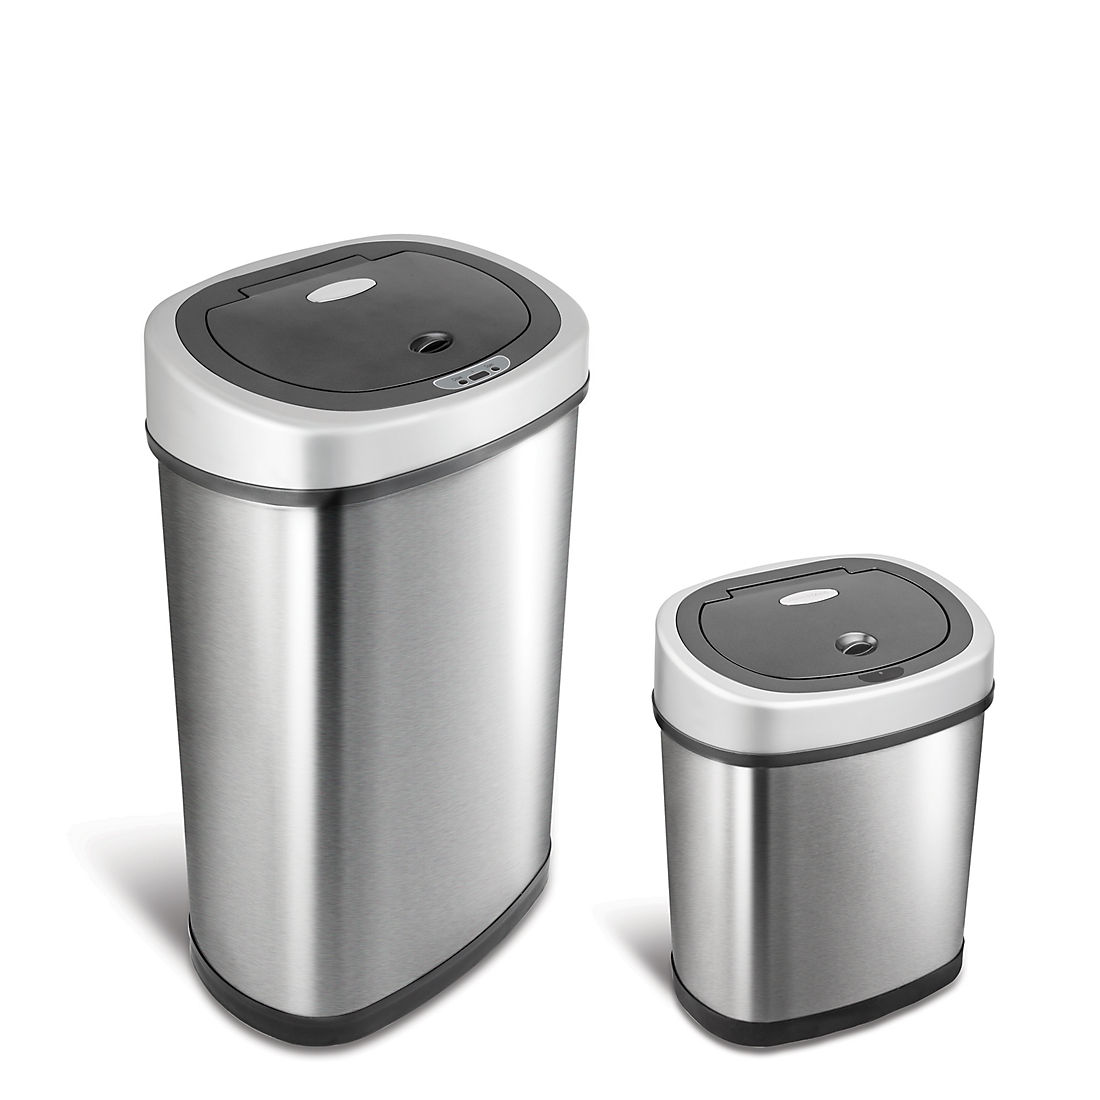 Automatic Garbage Can Motion Sensor Stainless Steel Trashcan Touchless Basura 